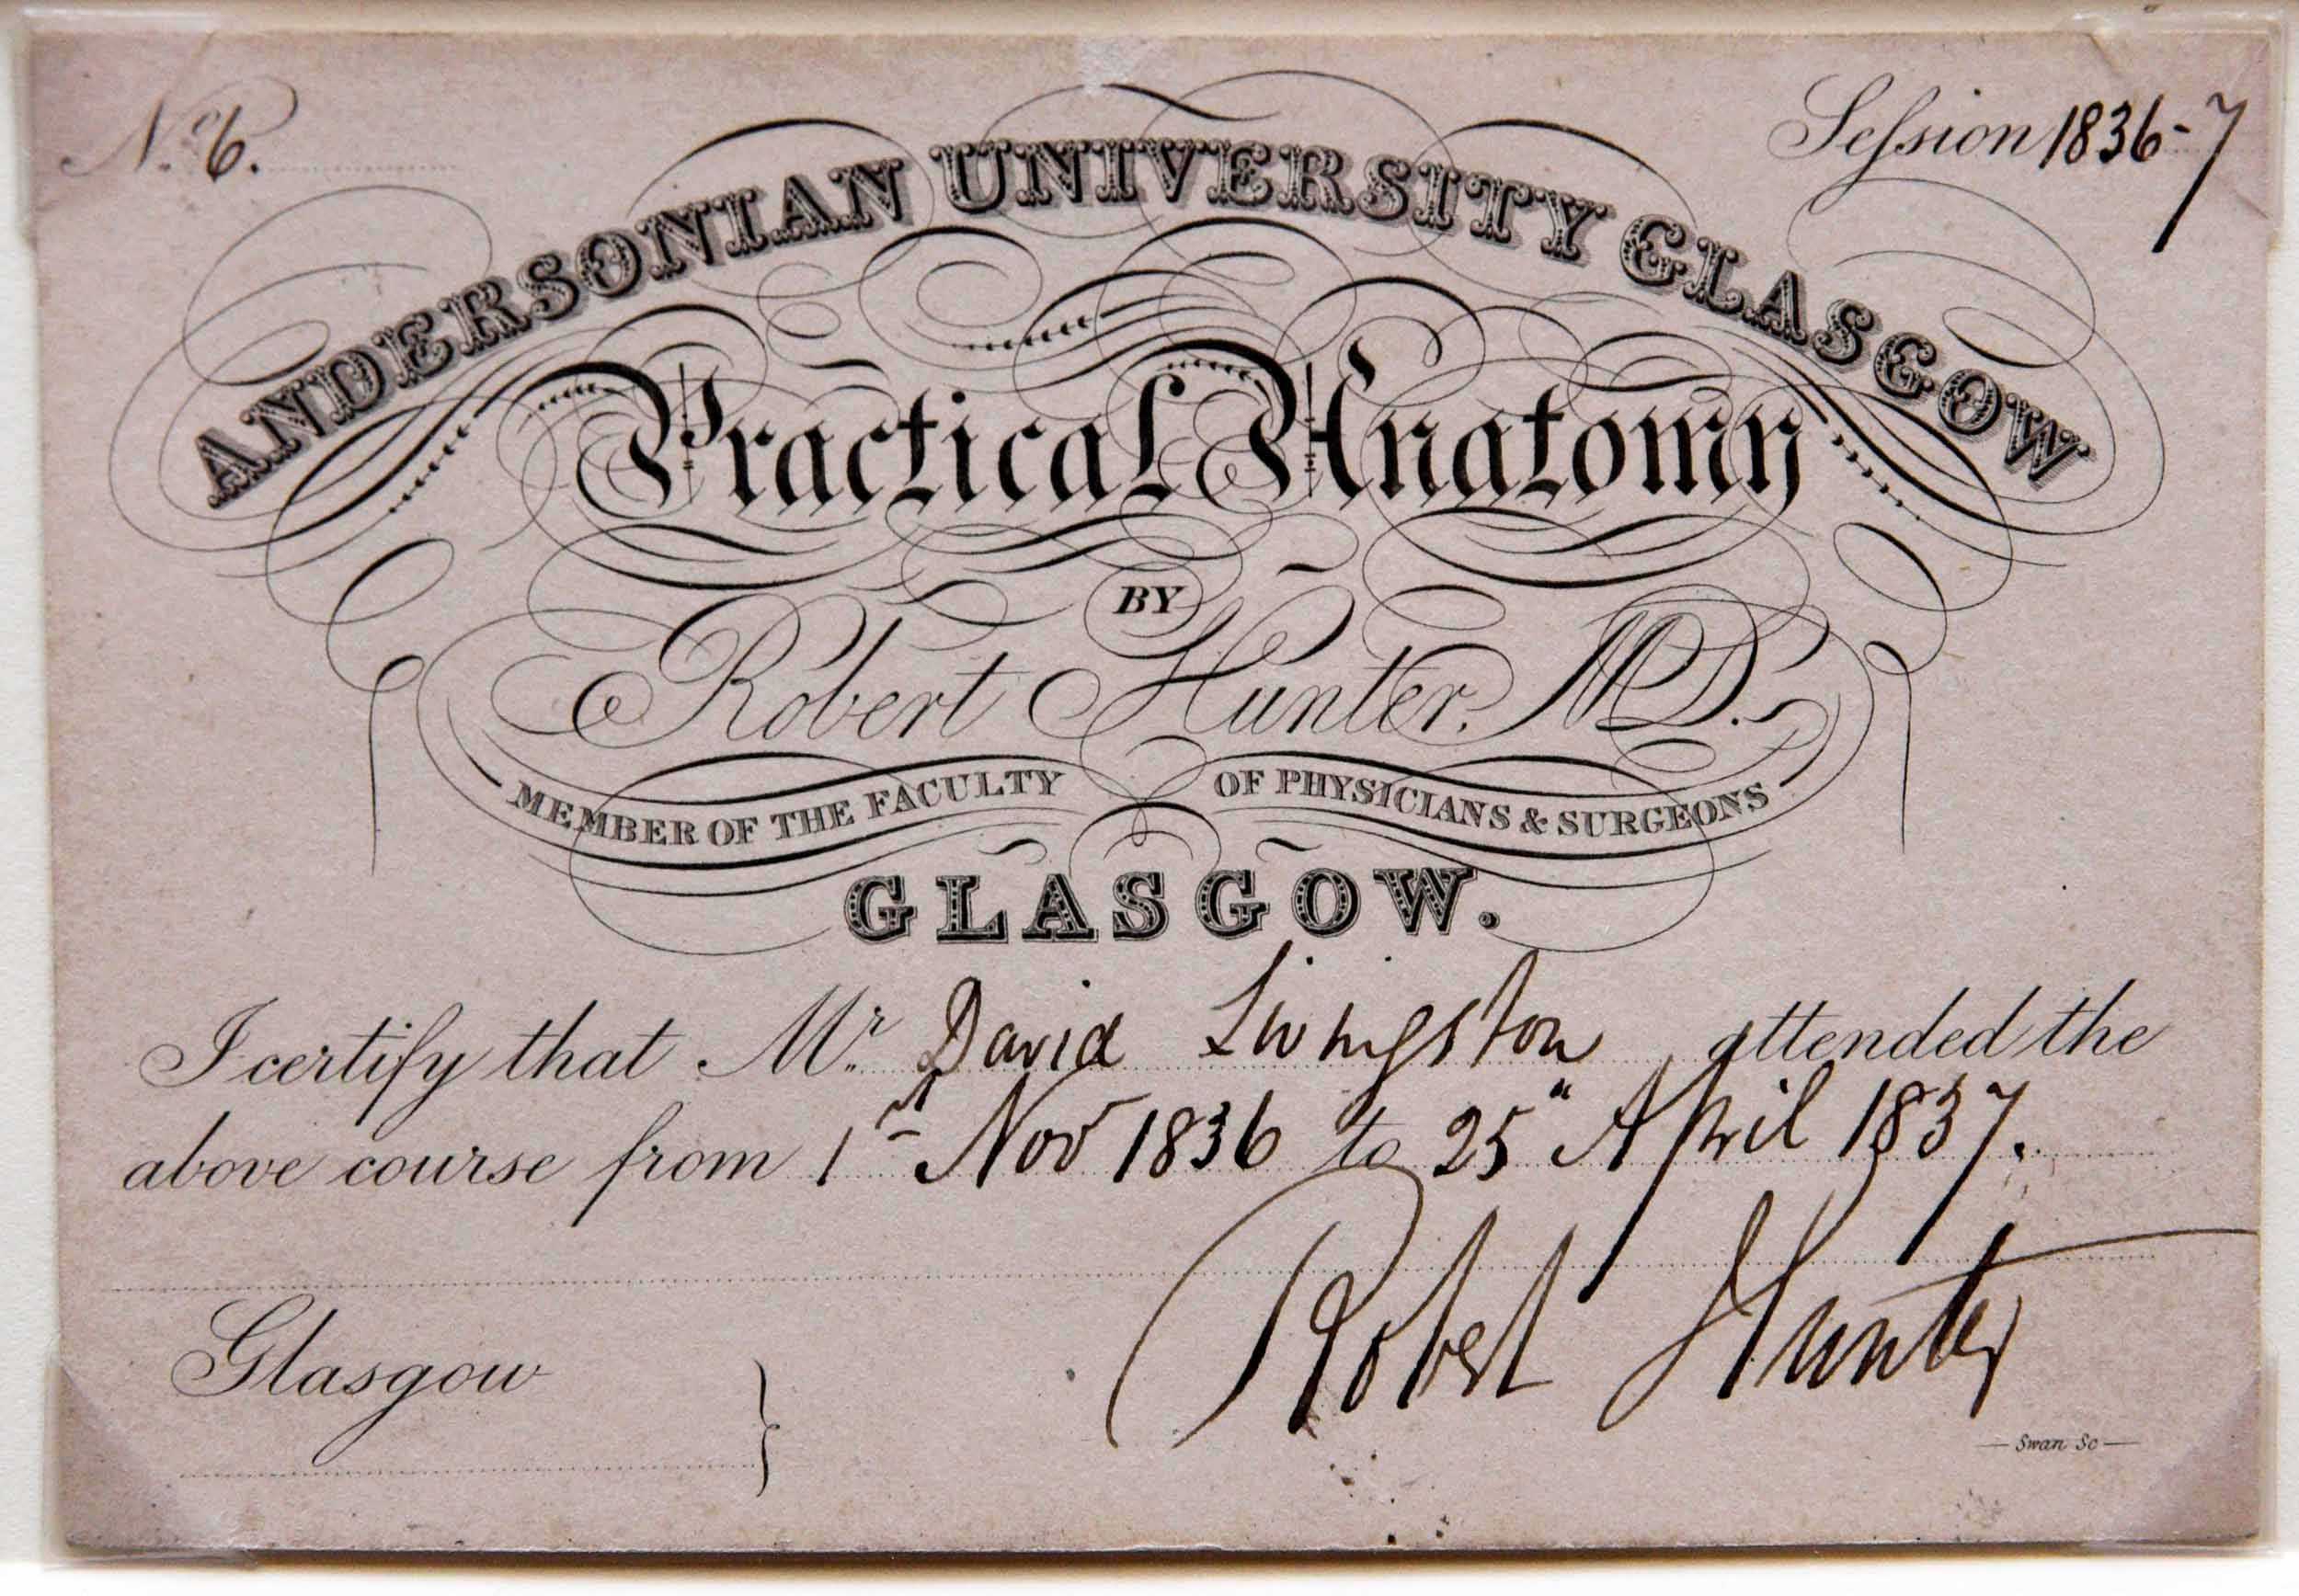 Livingstone's Andersonian University Certificate (Practical Anatomy), 1836-1837. Copyright Livingstone Online. May not be reproduced without the express written consent of the National Trust for Scotland, on behalf of the Scottish National Memorial to David Livingstone Trust (The David Livingstone Centre).